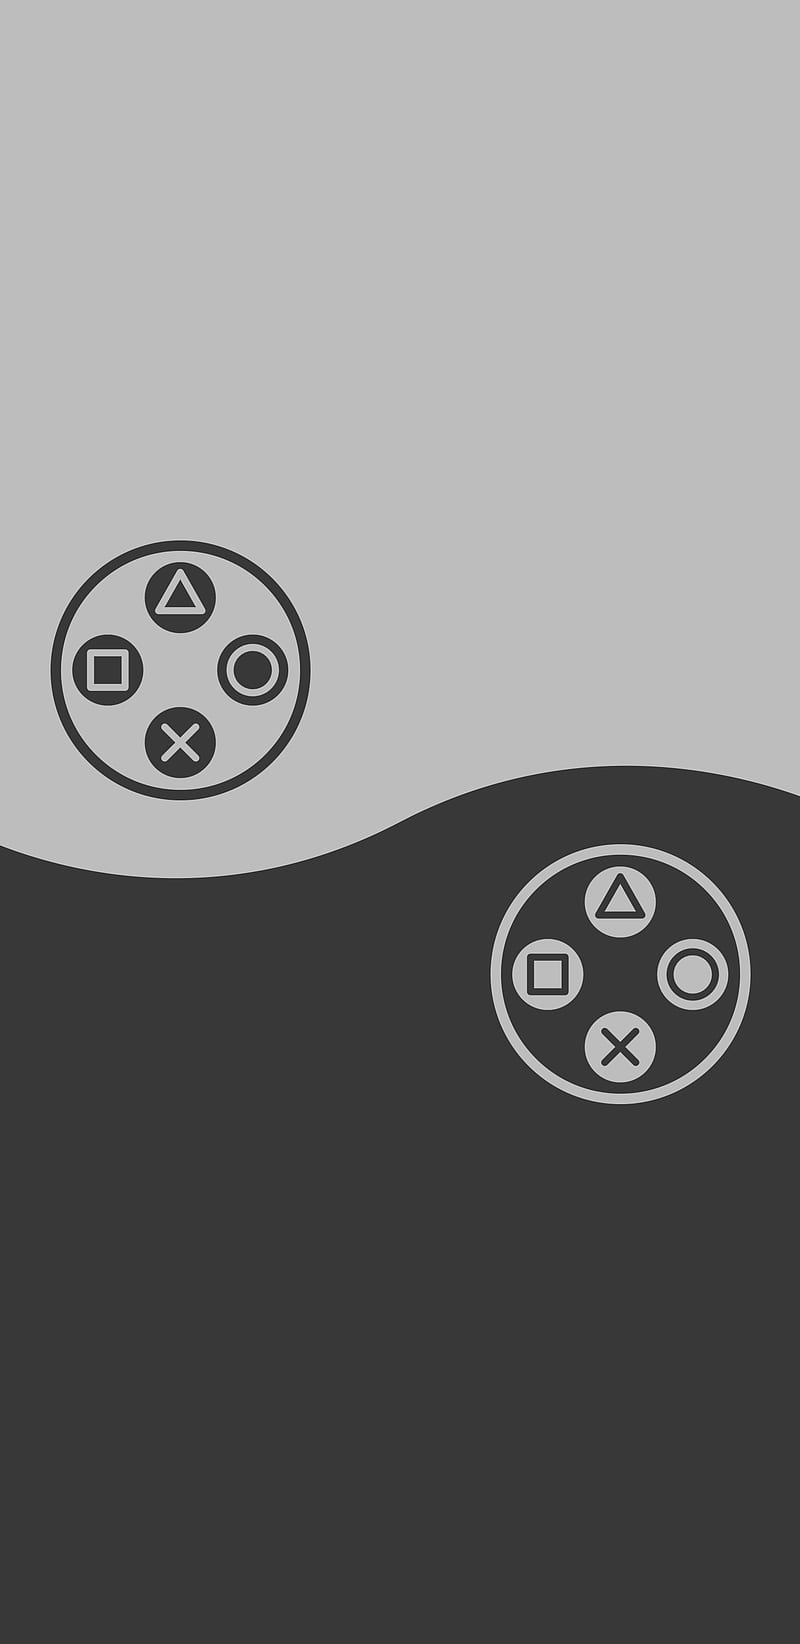 witcher 3 pc ps4 controller icons